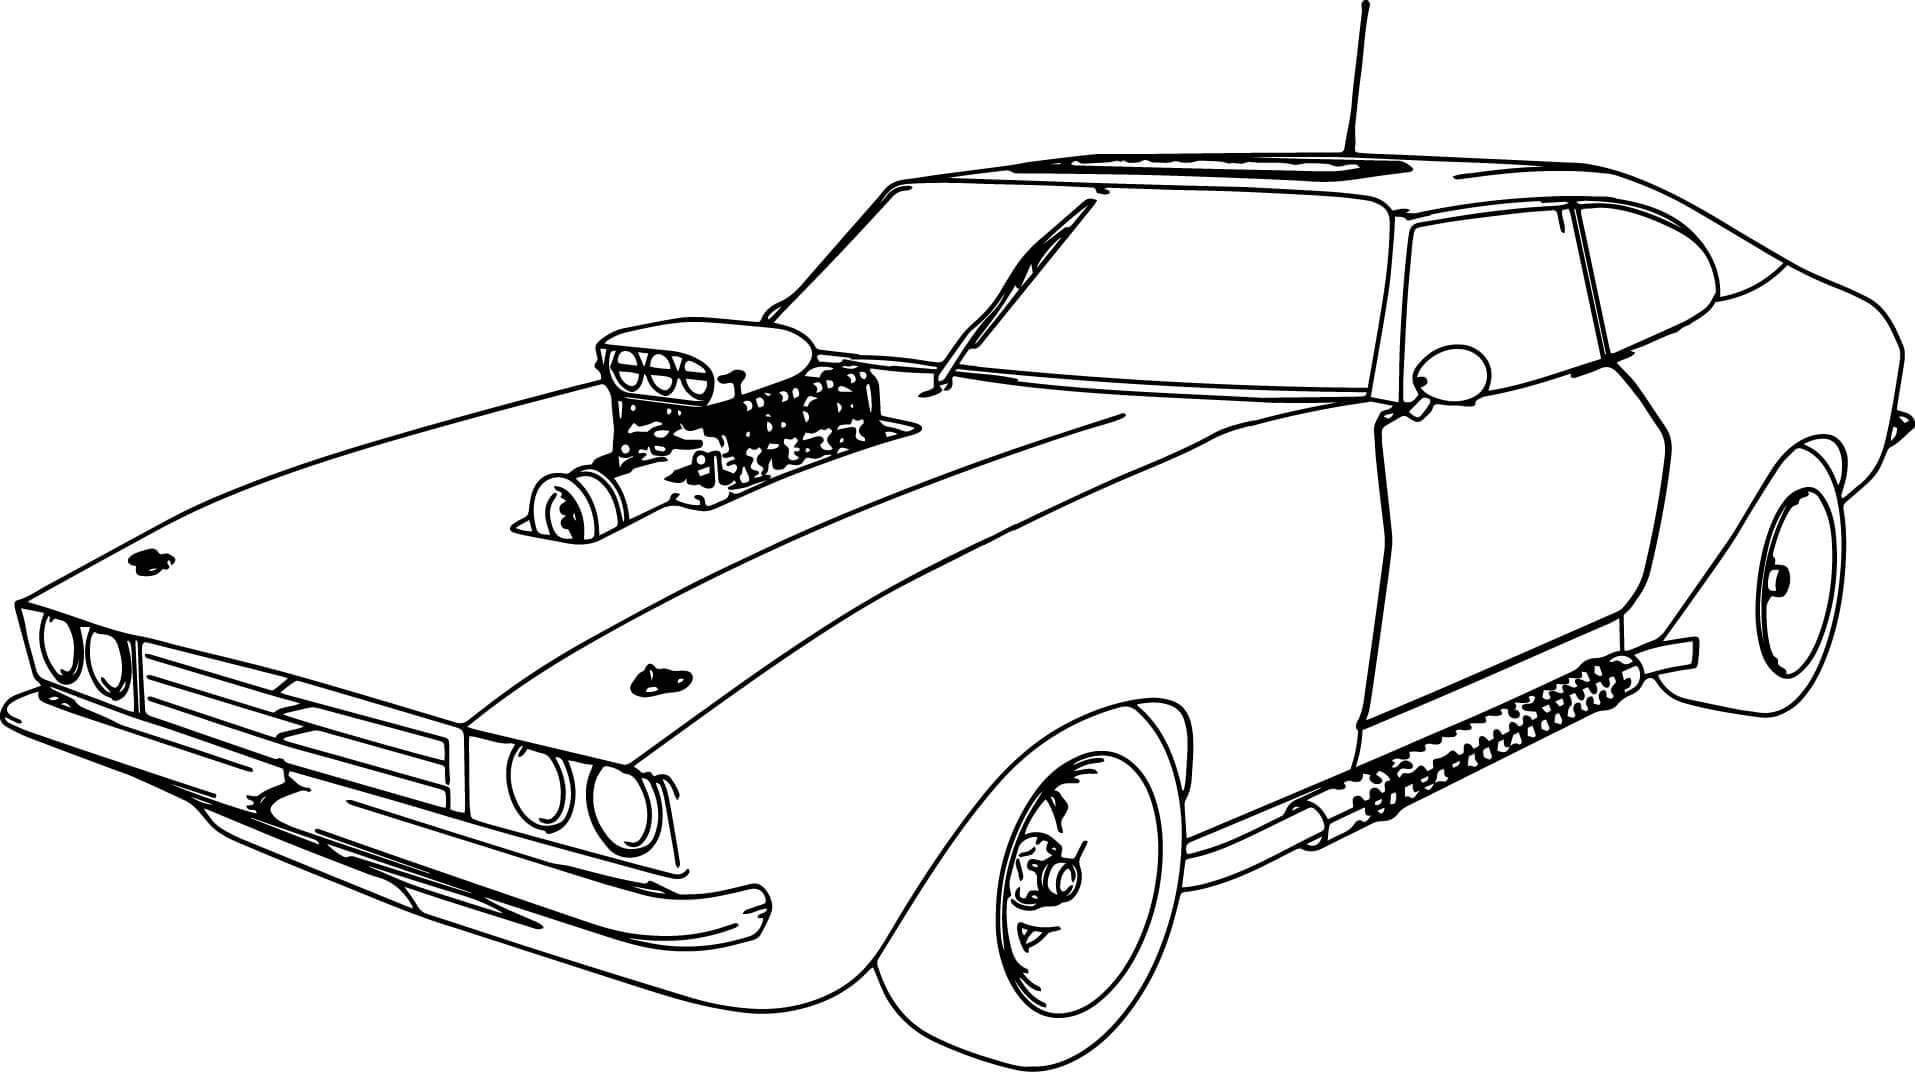 Car Coloring Pages - coloring.rocks!